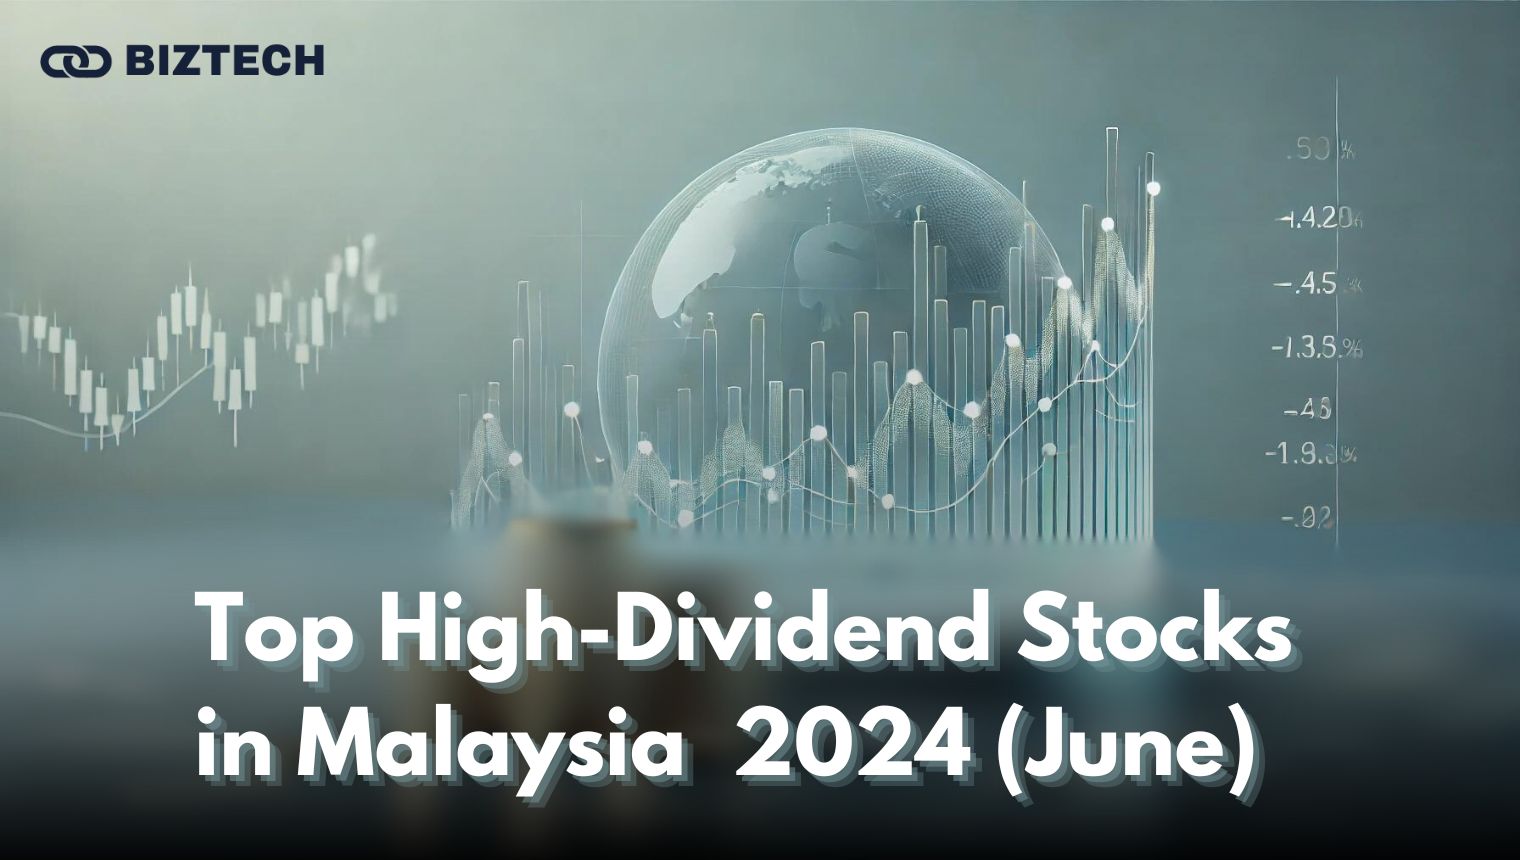 Top High-Dividend Stocks in Malaysia